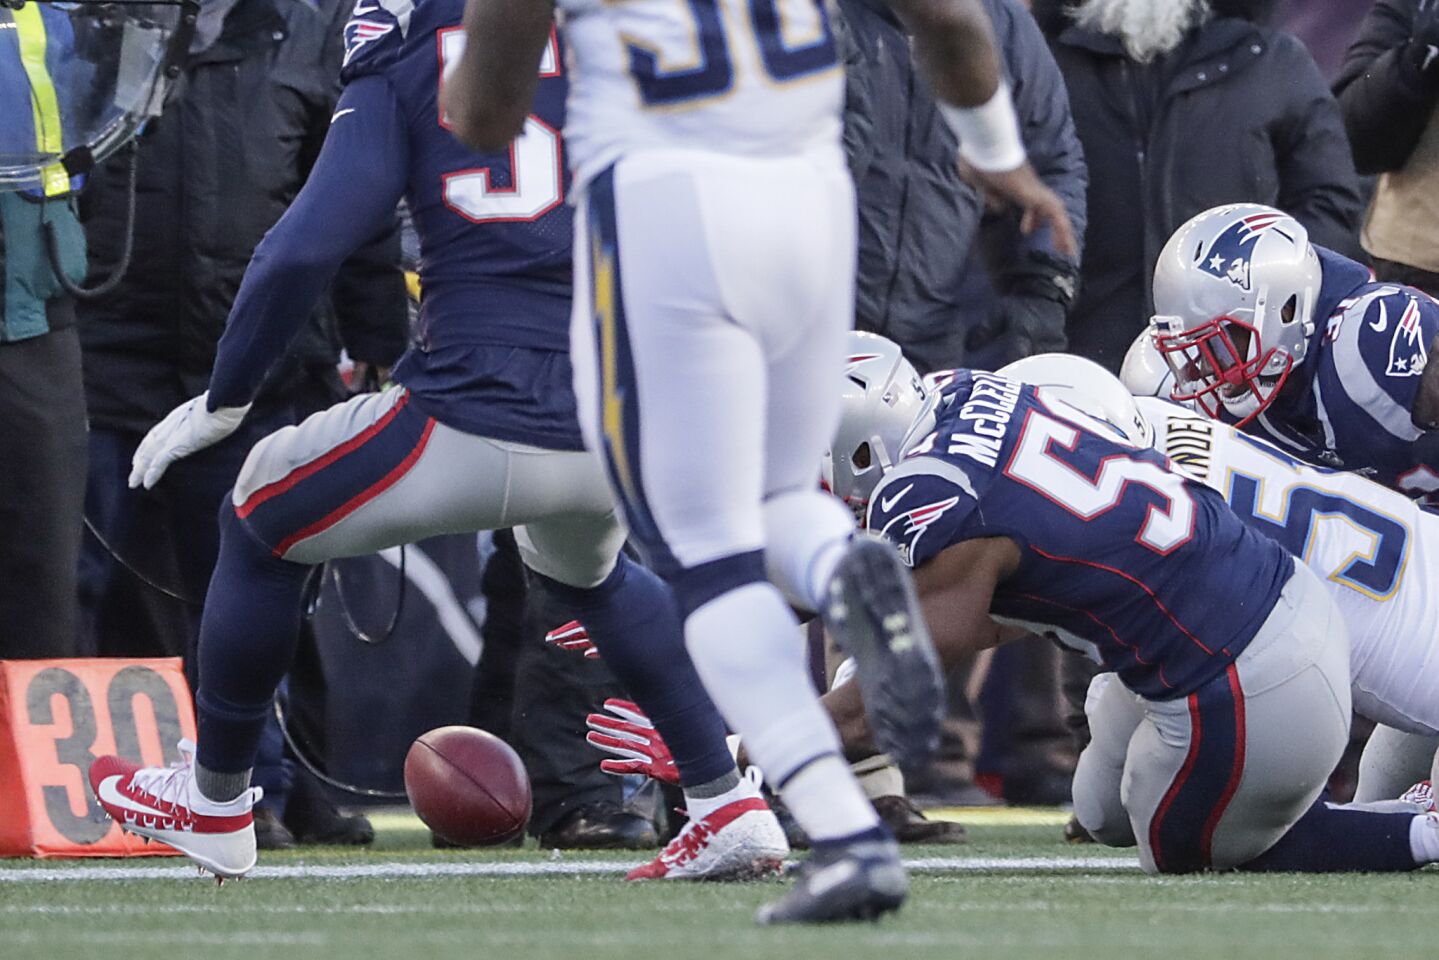 New England Patriots linebacker Albert McClellan dives on a ball fumbled by Chargers punt returner Desmond King Jr. during second quarter action in the NFL AFC Divisional Playoff at Gillette Stadium.